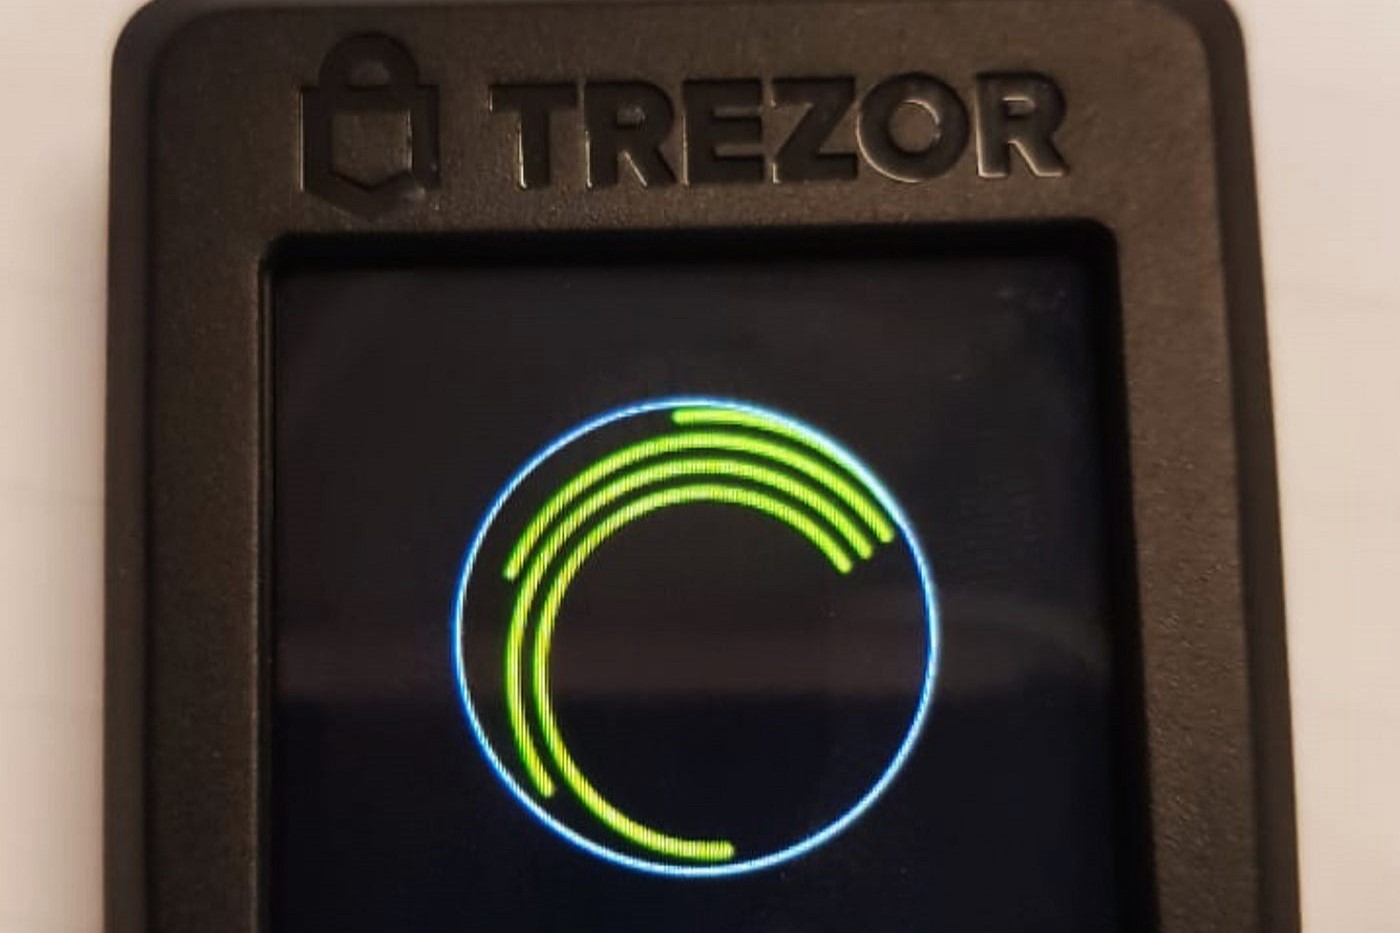 How Many Confirmations Does Trezor Need To Confirm Bitcoin Withdrawal